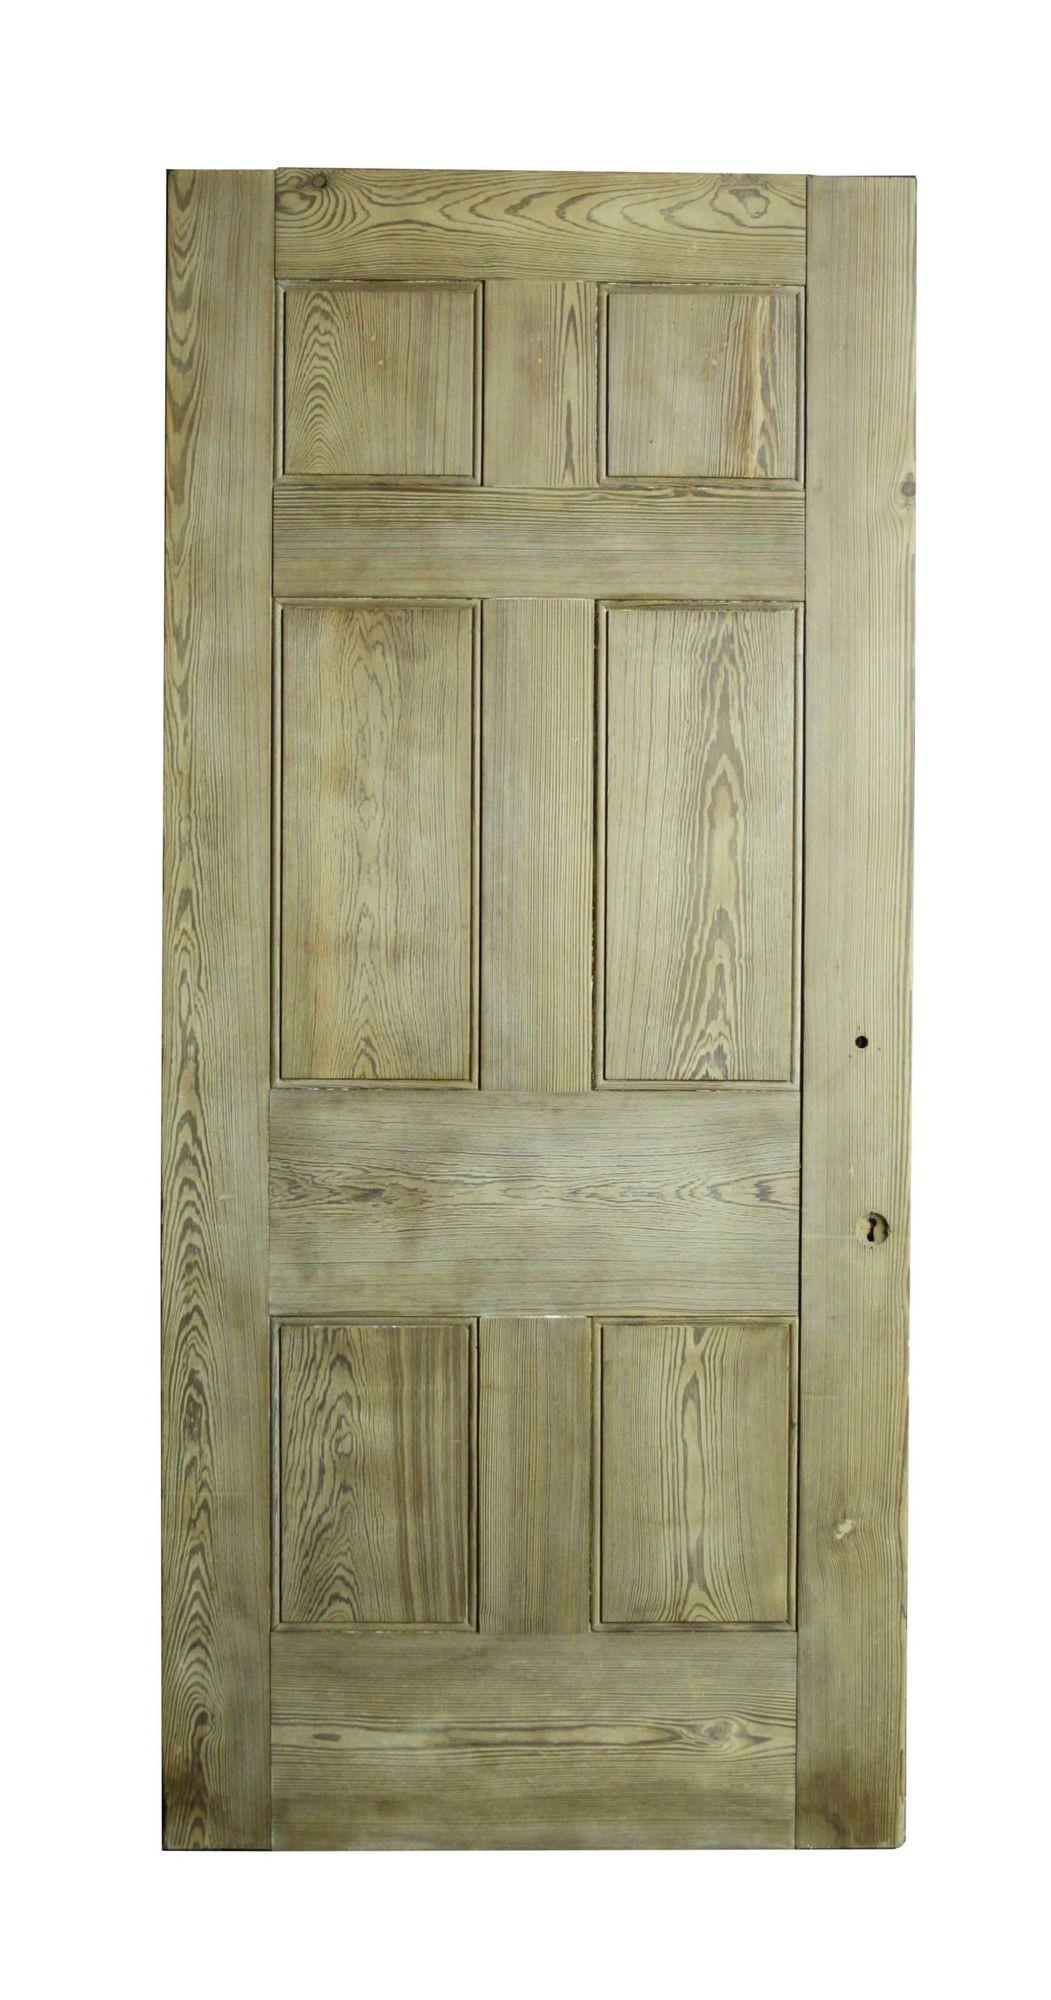 This door is part of an unusual set of 12 incredibly heavy and solid six panel doors, salvaged from the outbuildings of a country house in Shropshire.

We have 12 of these doors available. Price is per door.

These are suitable for interior or